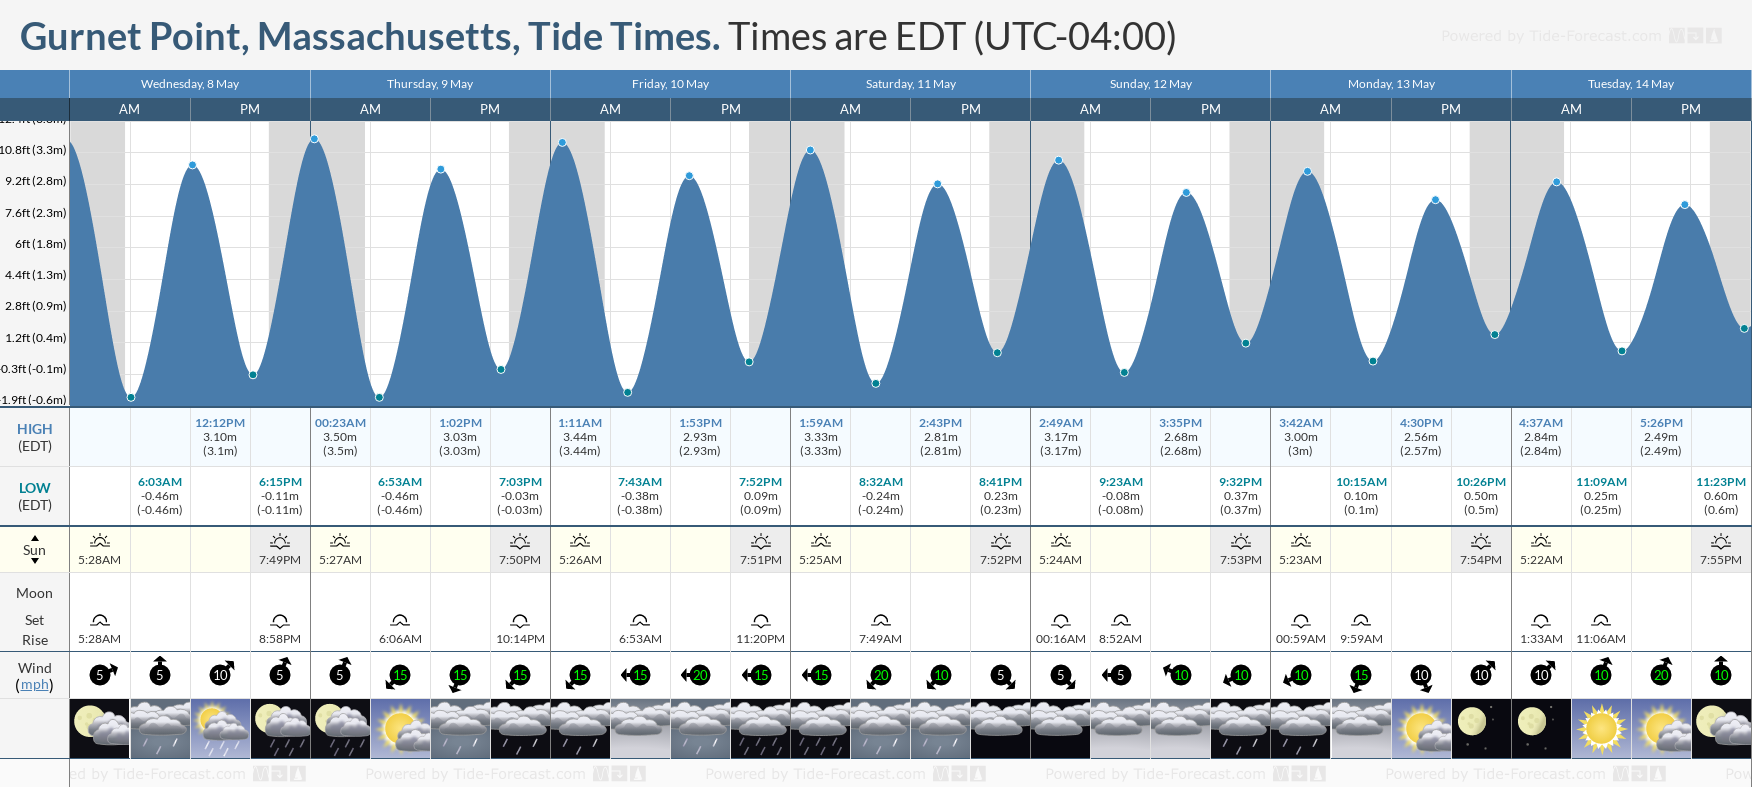 Gurnet Point, Massachusetts Tide Chart including high and low tide tide times for the next 7 days